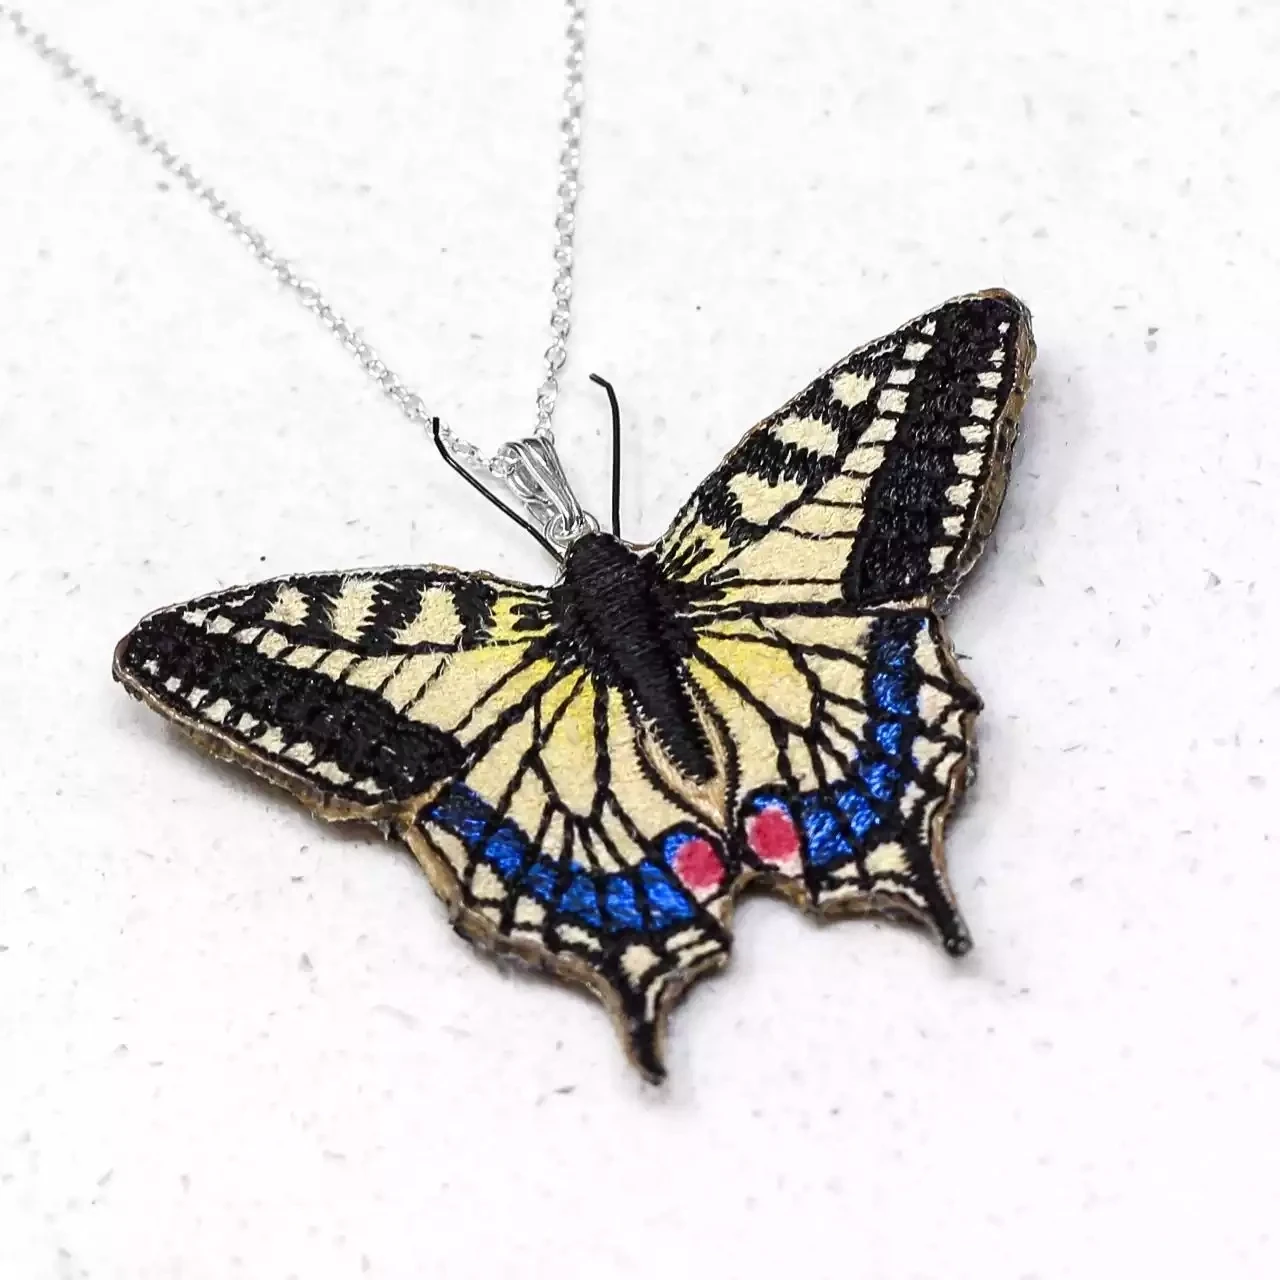 Handpainted and Embroidered Fabric Pendant - Swallowtail Butterfly by Vikki Lafford Garside